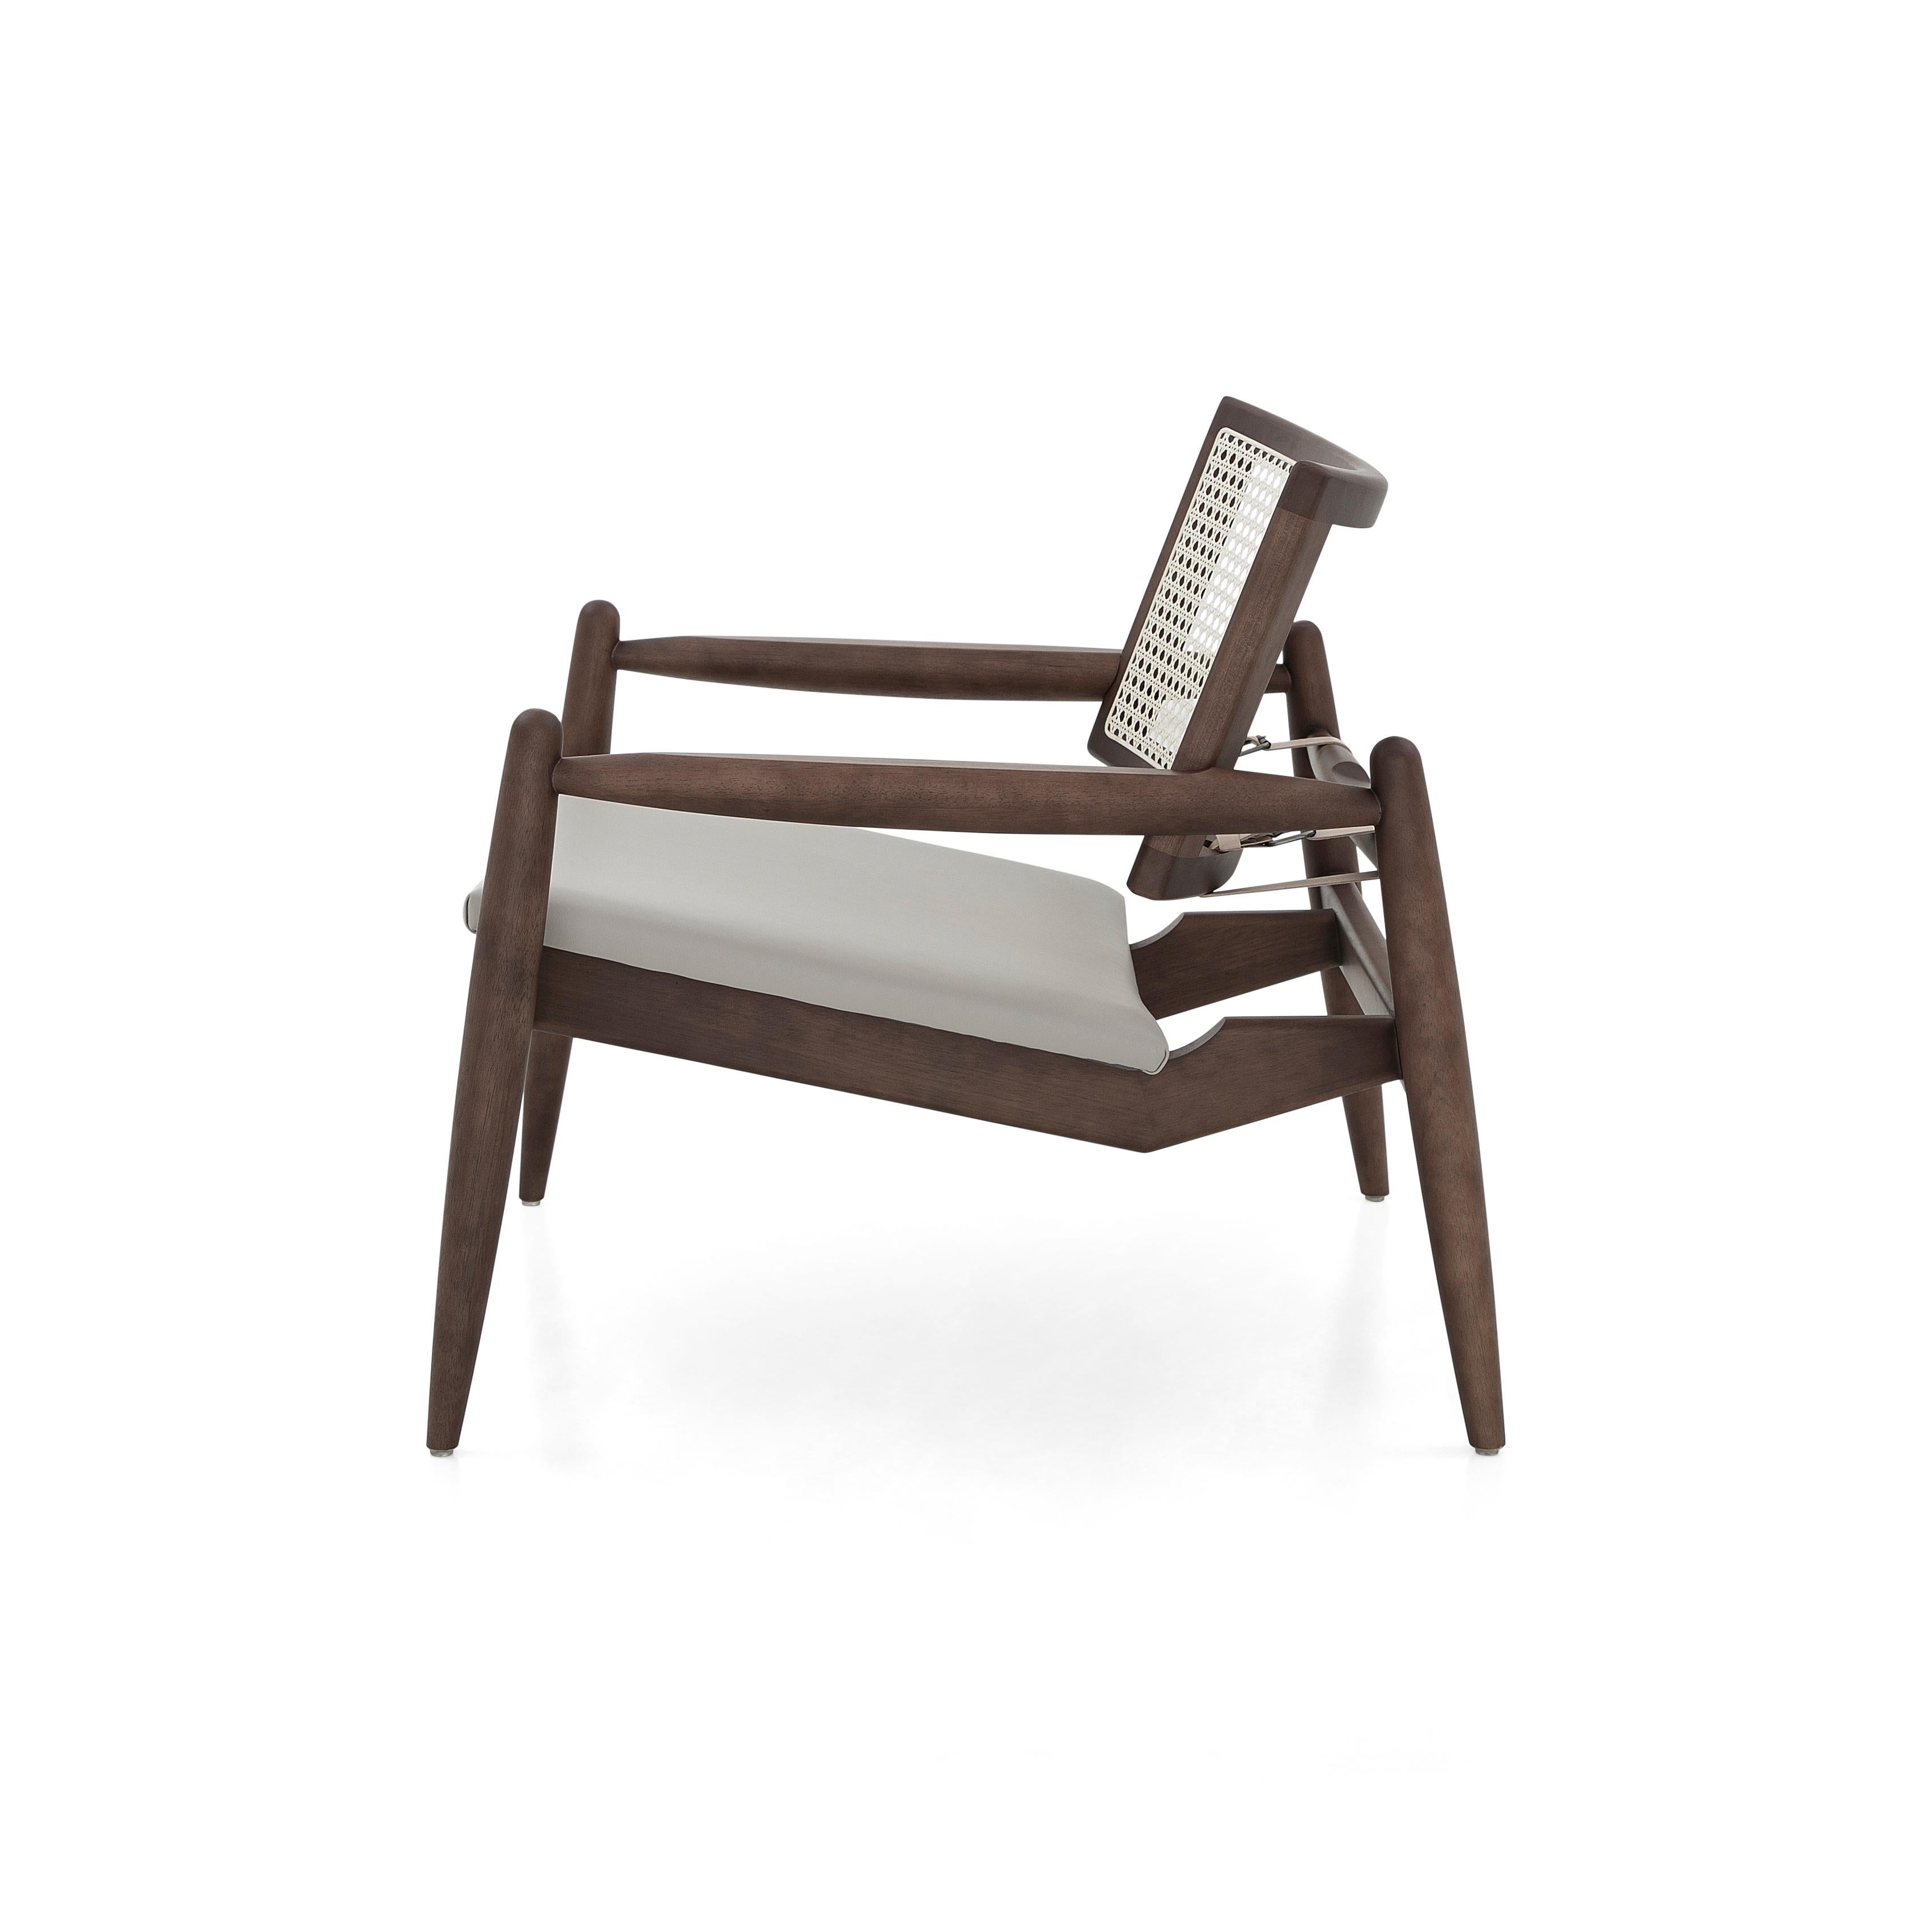 The Uultis design team has created the Soho curved cane with a cane curved back with a walnut wood finish for all those people that are looking for an elegant but vintage look in their bedrooms, living rooms, and offices. This chair has everything